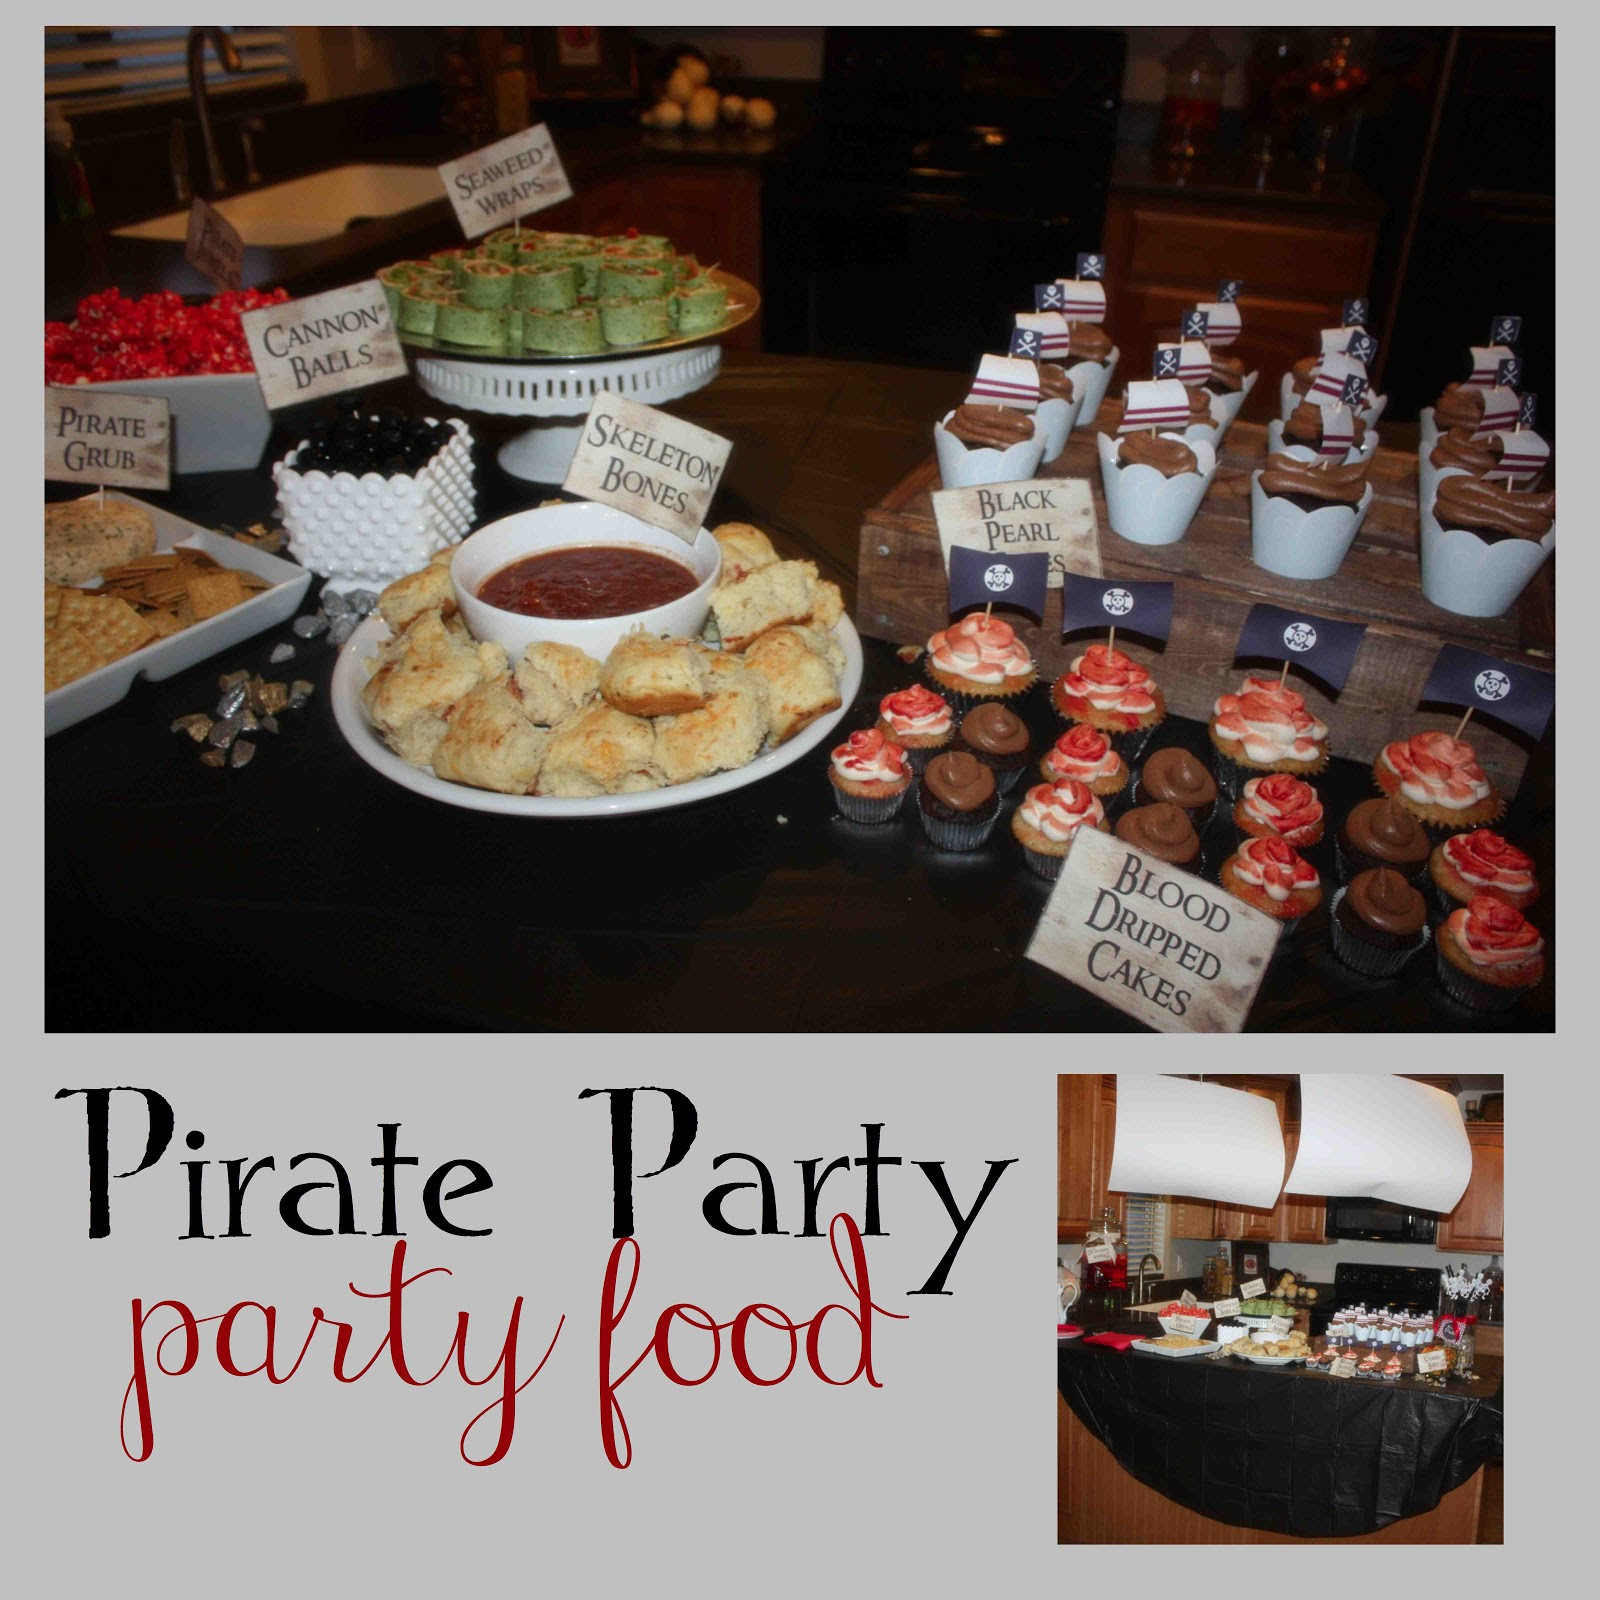 Pirate Birthday Party Food Ideas
 just Sweet and Simple Kids Pirate Party